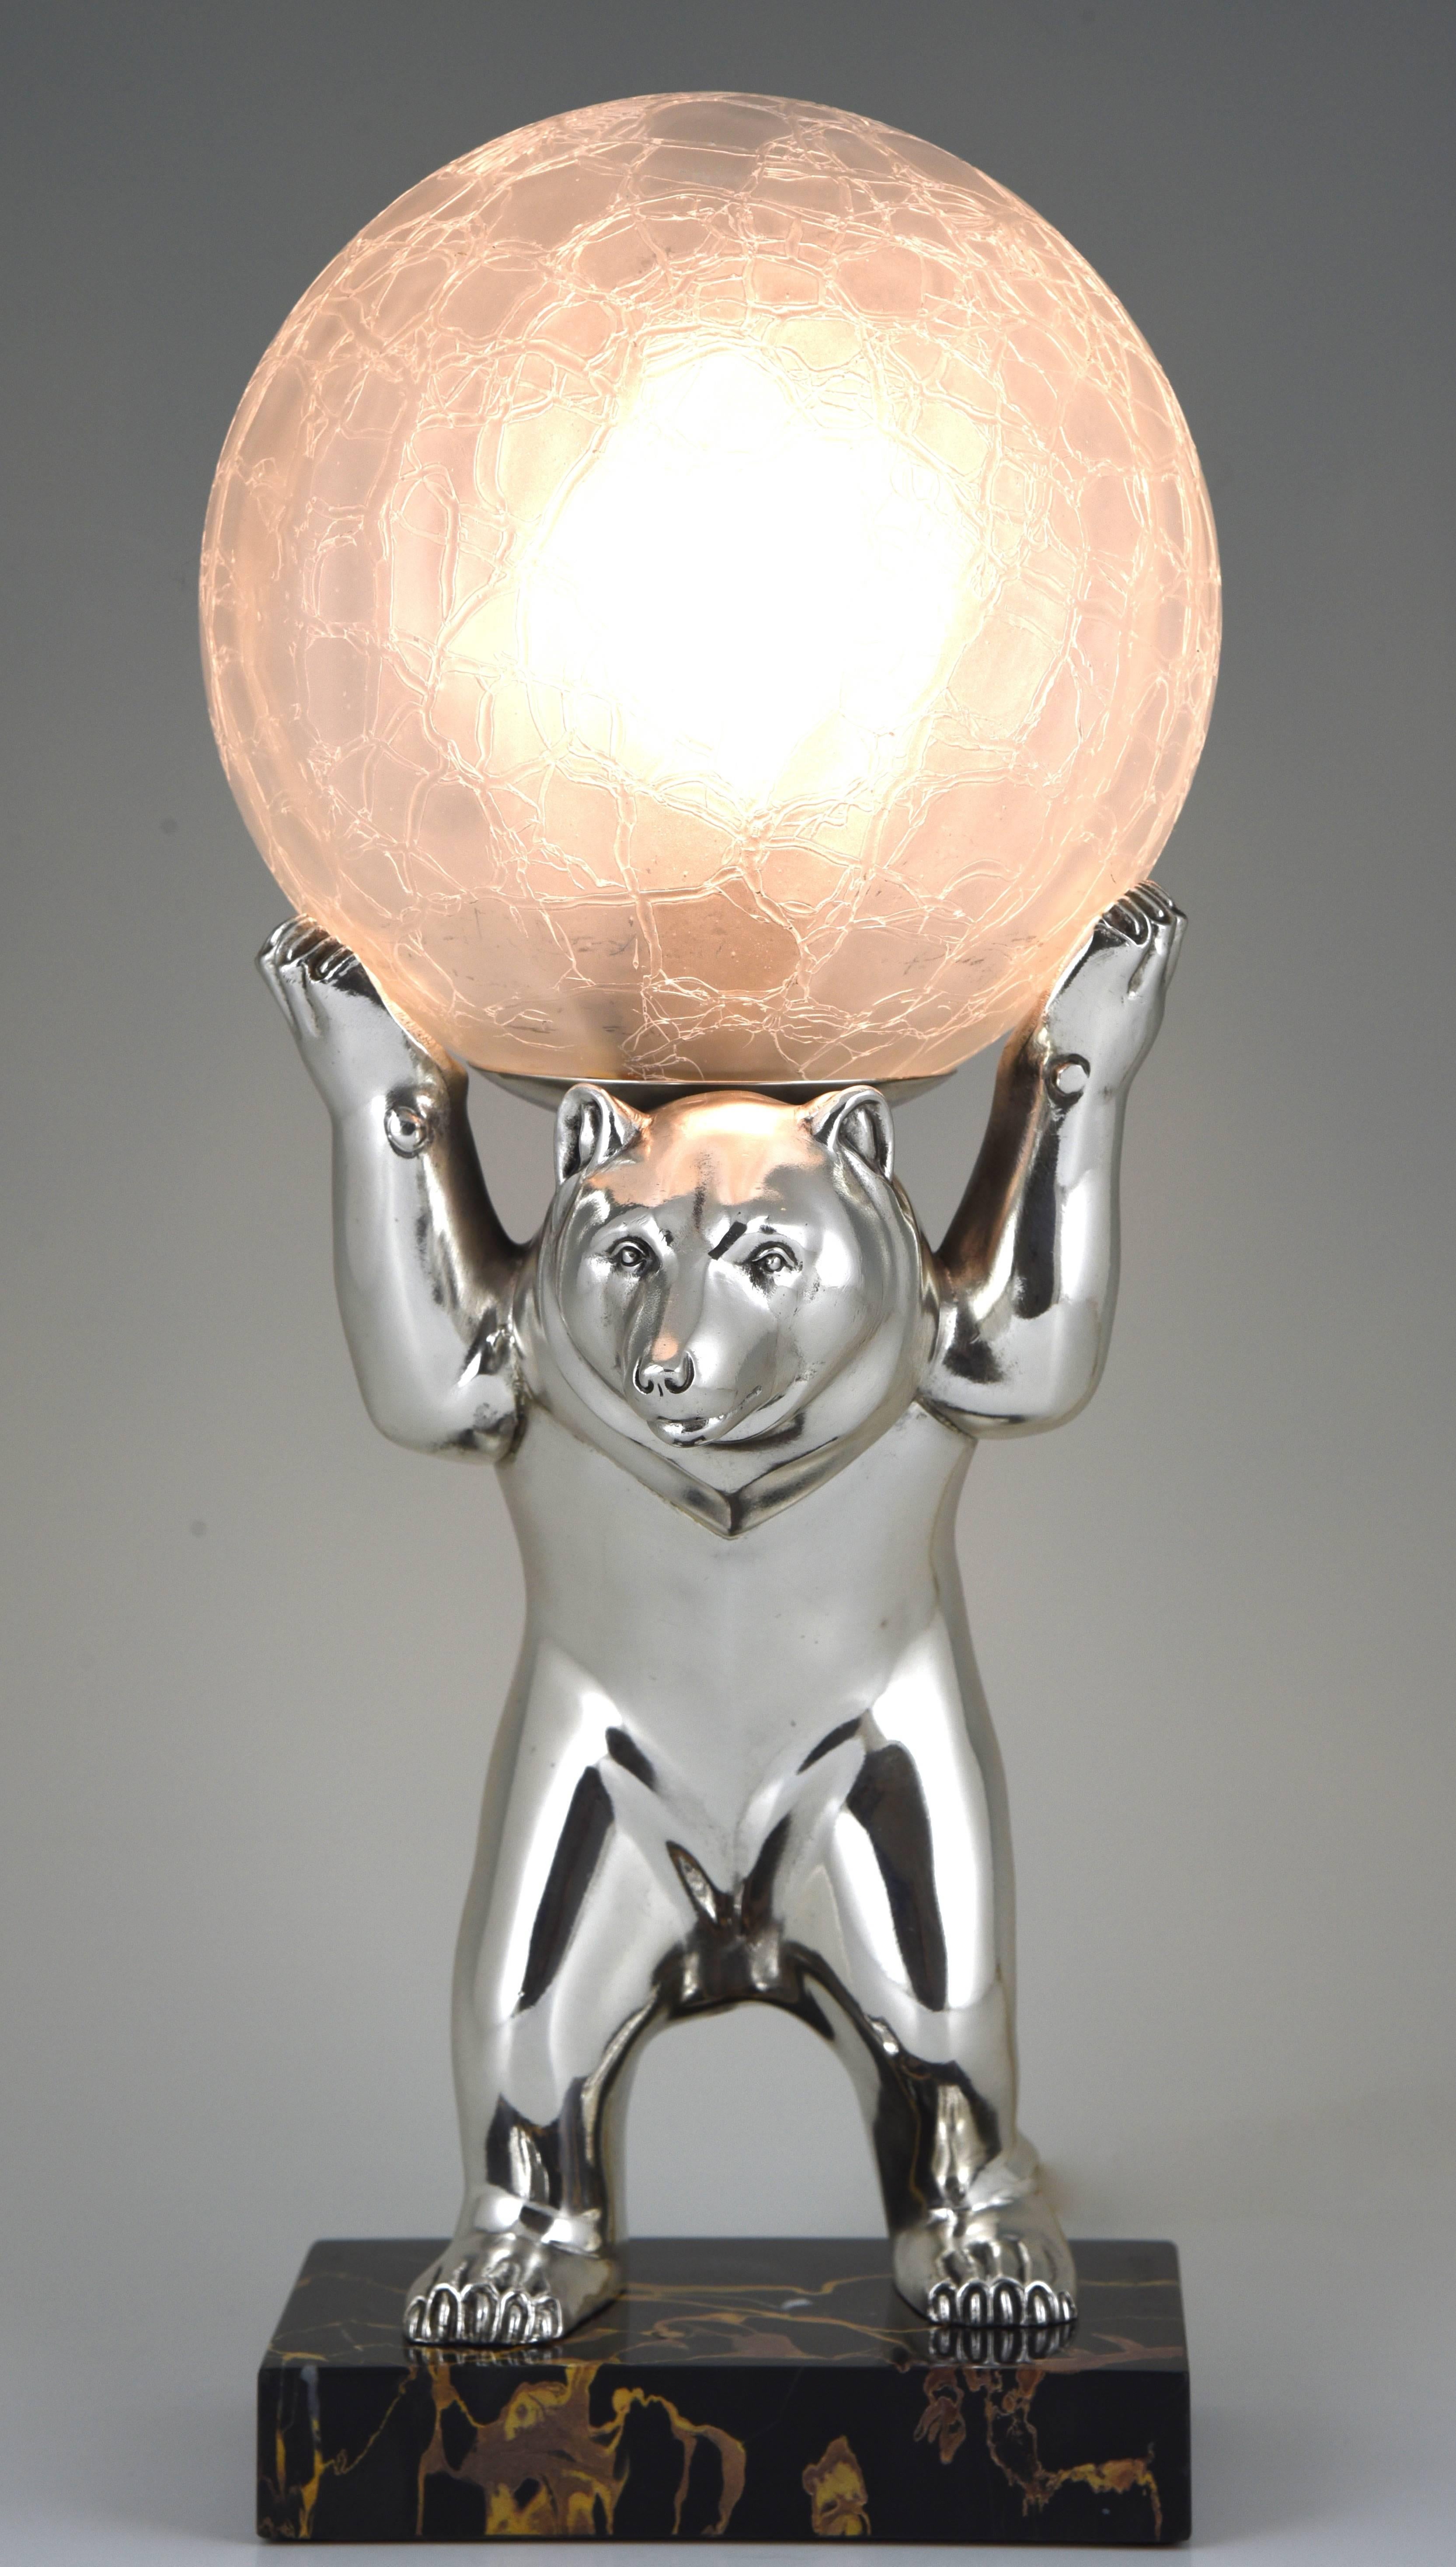 French Art Deco lamp modelled as a bear holding a glass globe. The sculpture is standing on a portor marble base. 

Artist/ Maker: Irenee Rochard
Signature/ Marks: I. Rochard.
Style: Art Deco
Date: 1930
Material: Silvered metal. Crackle glass